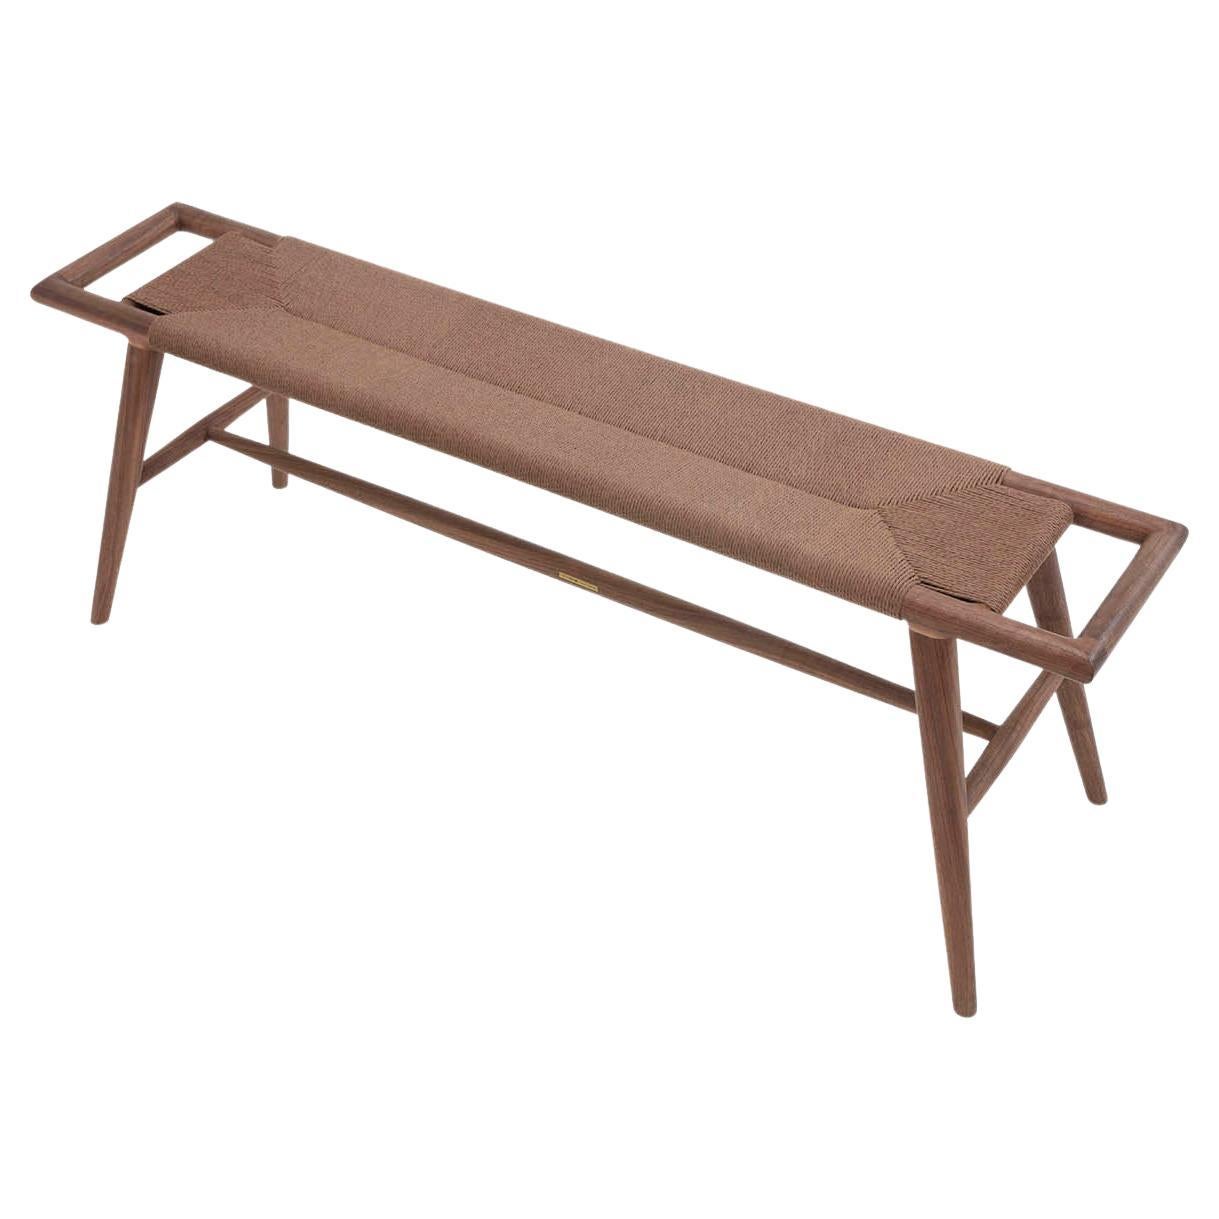 Woven Walnut Bench, Mortise & Tenon Joinery For Sale